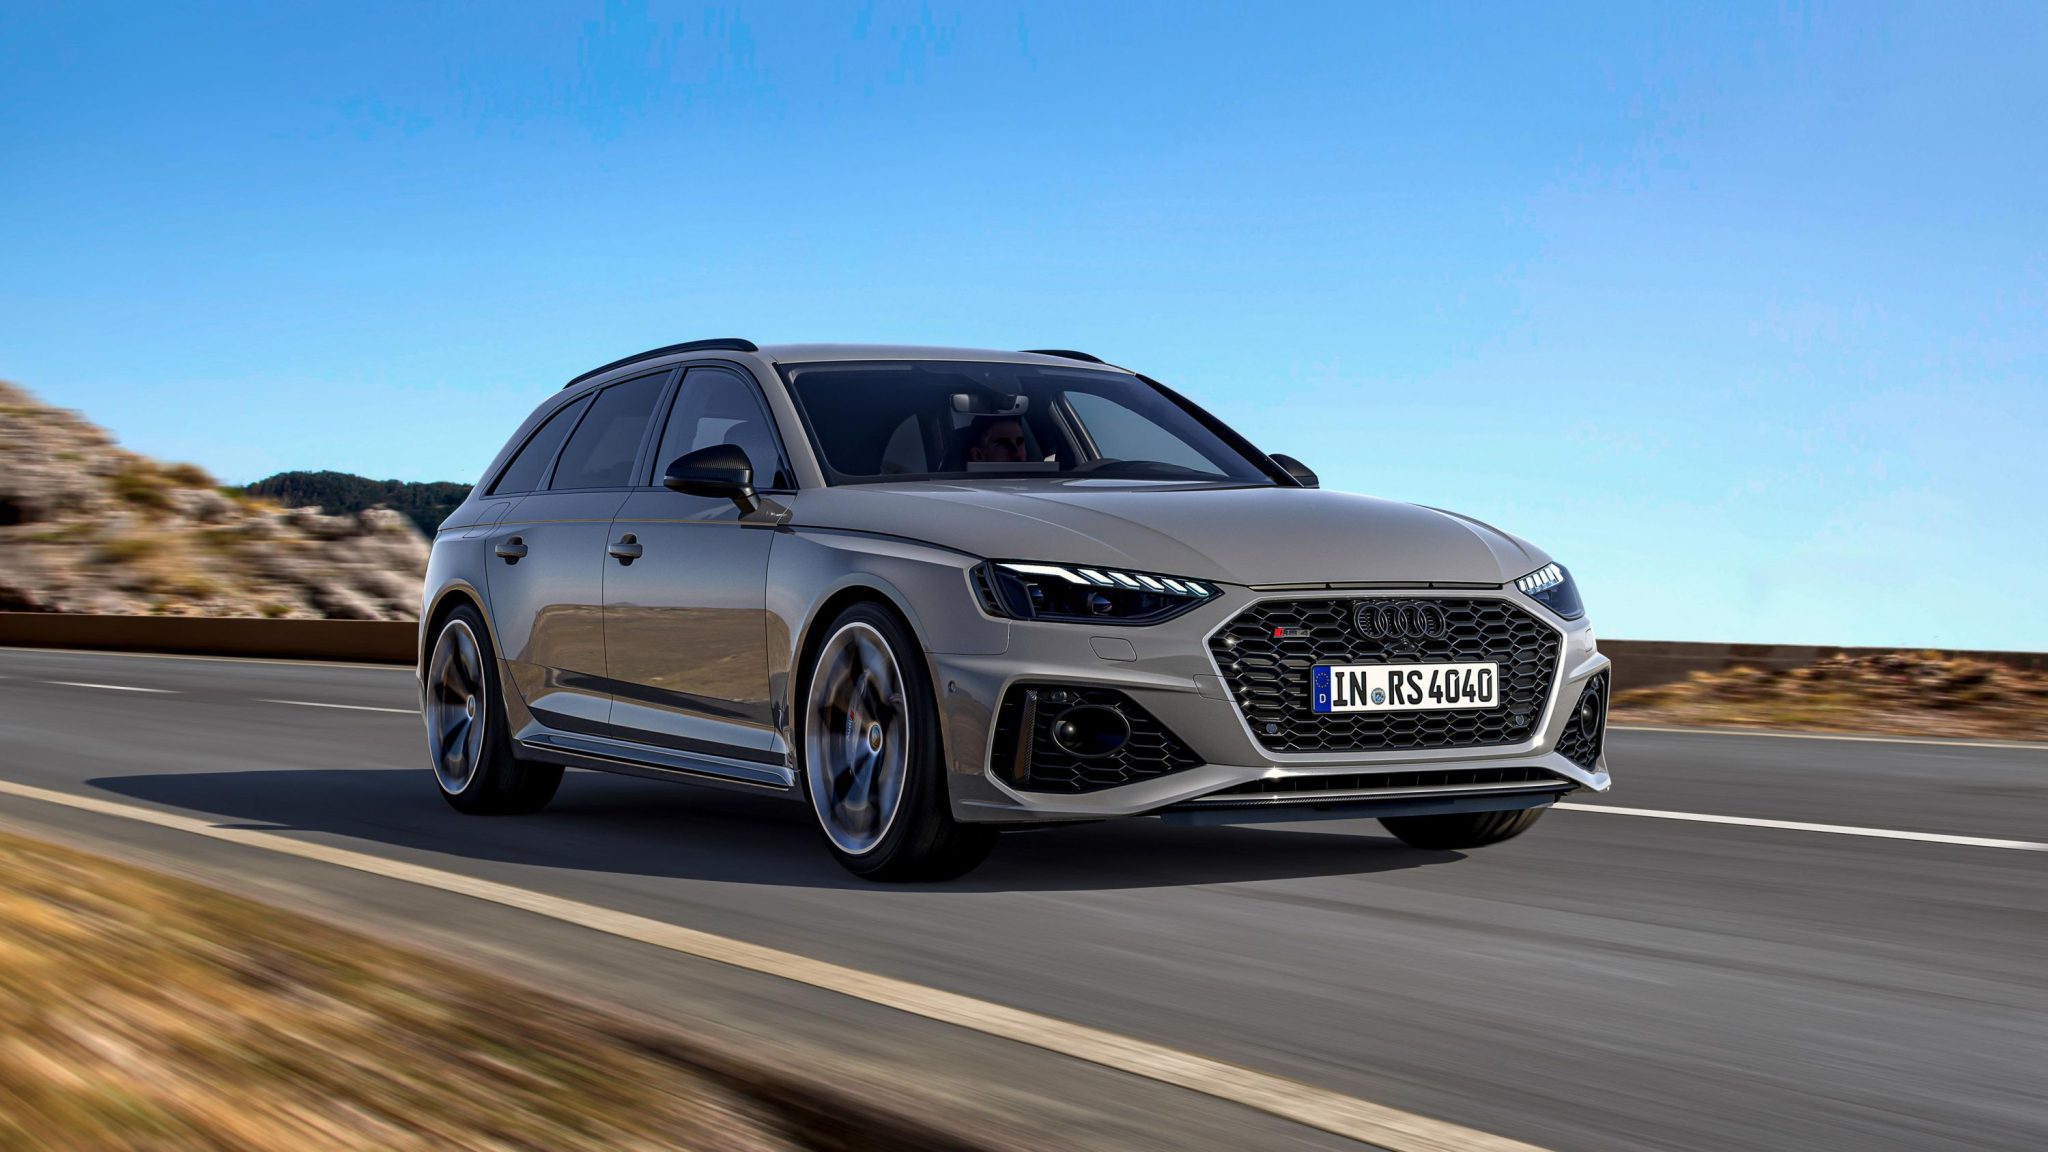 2019 Audi A3 and Q2 on Sale in Germany With Much Smaller Engine